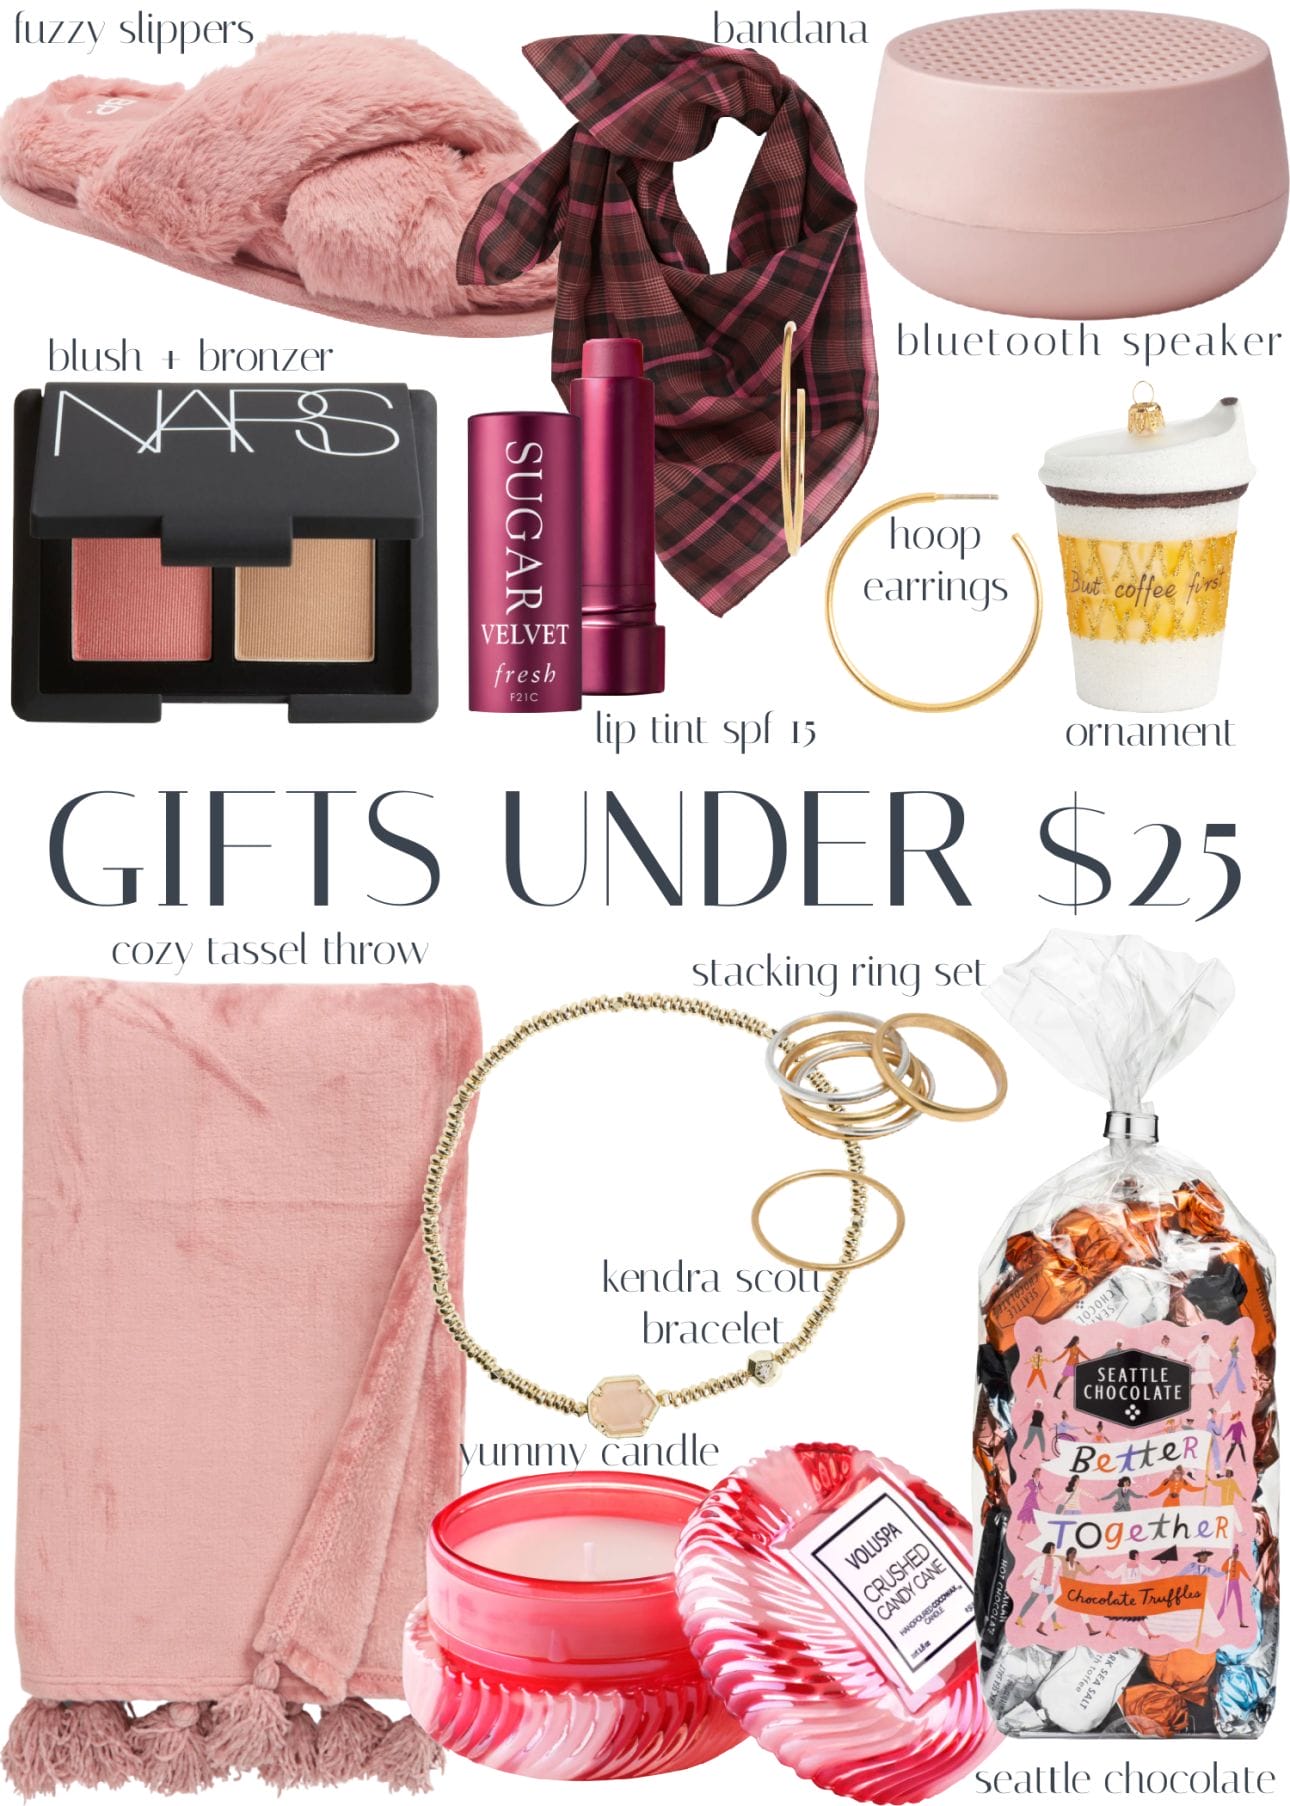 The Best Gifts Under $25 - The Stripe.